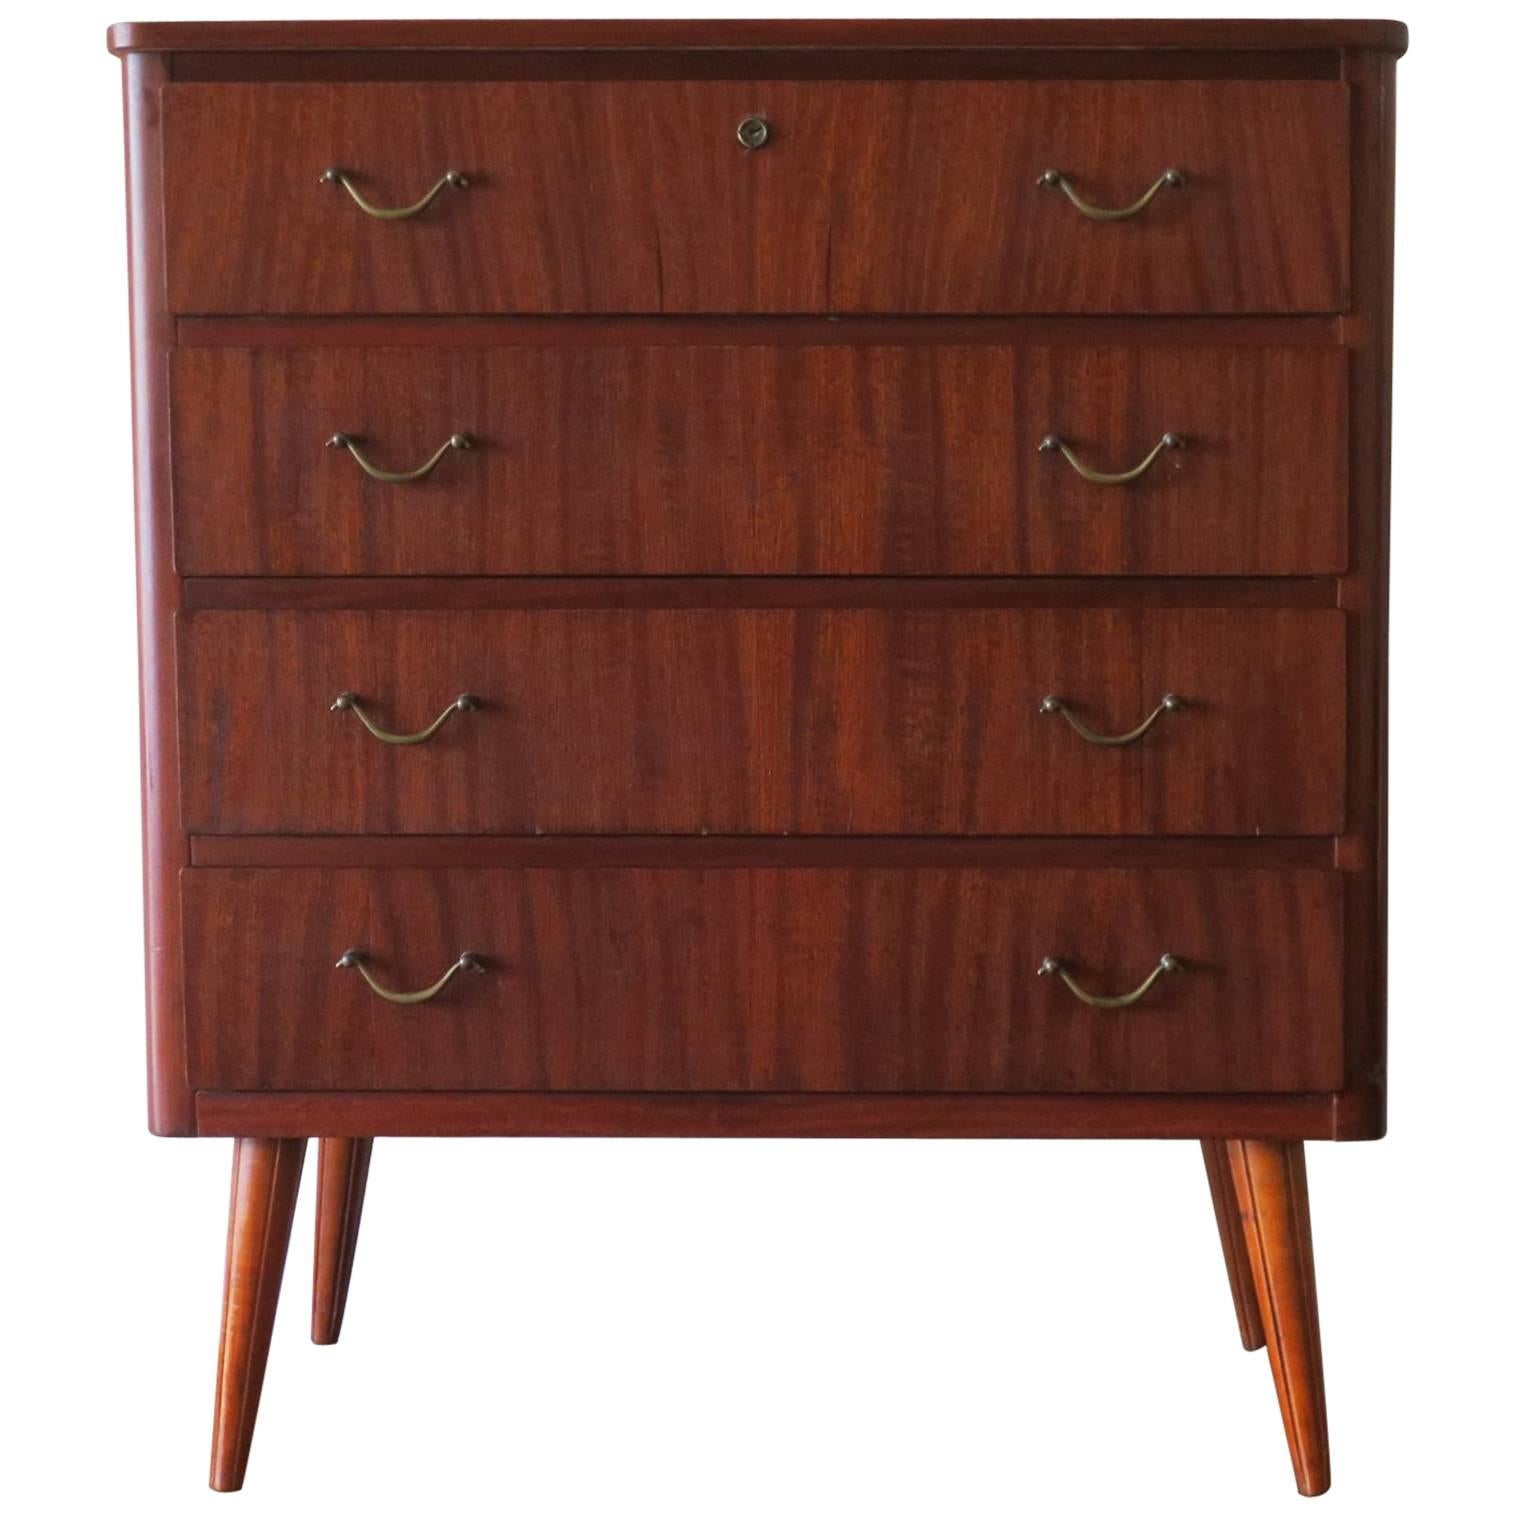 Small Mid Century Scandinavian Chest in Warm-Colored Teak, 1960s For Sale